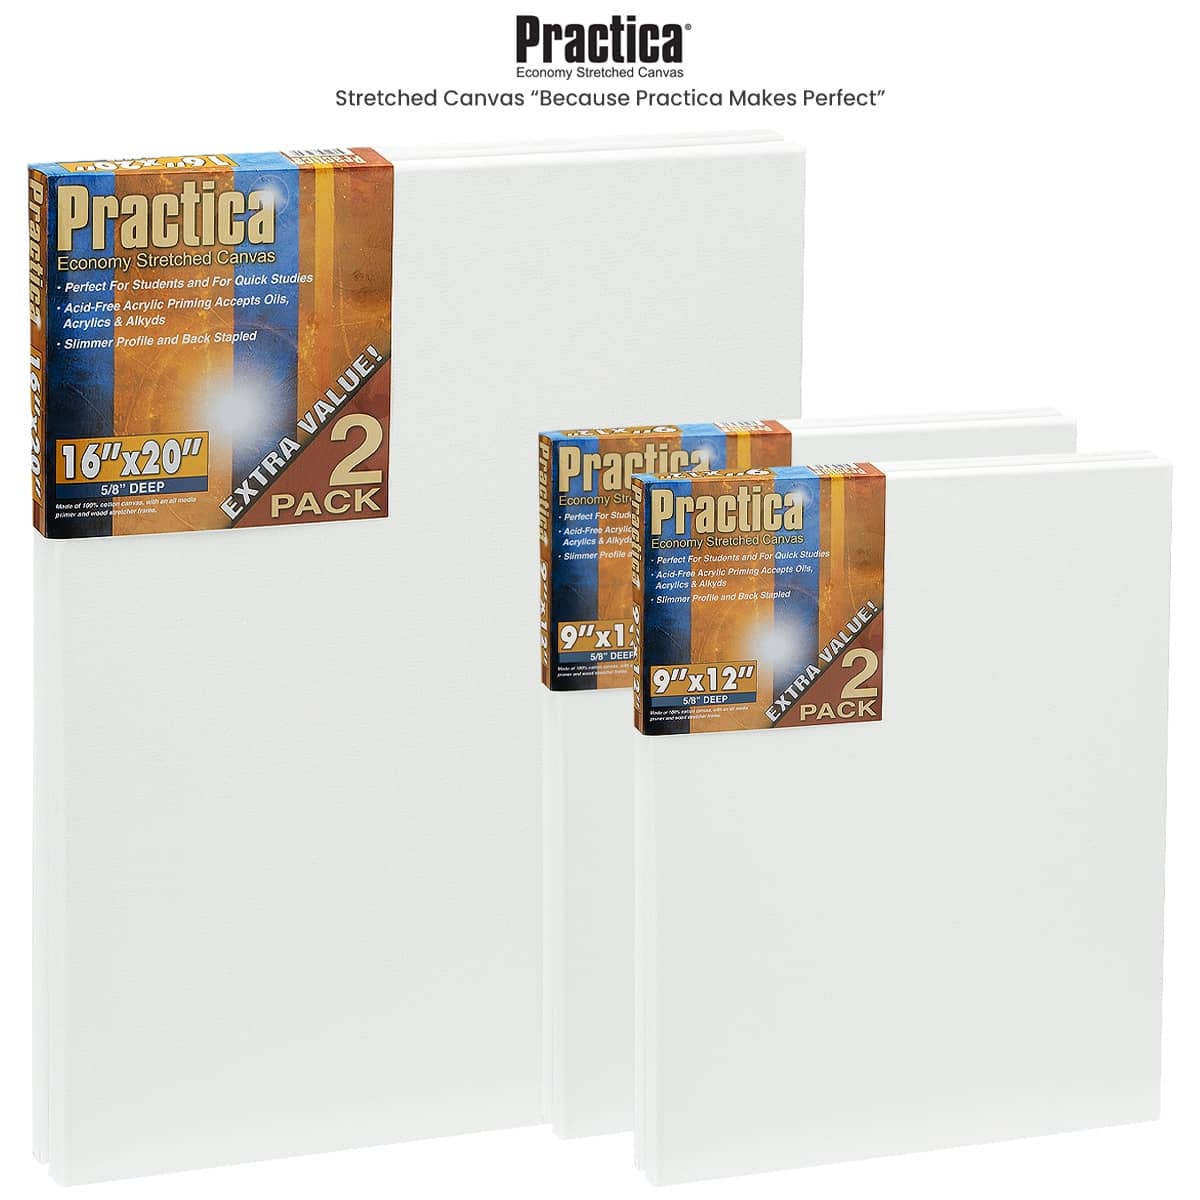 Practica Economy Stretched Canvas 2 Packs